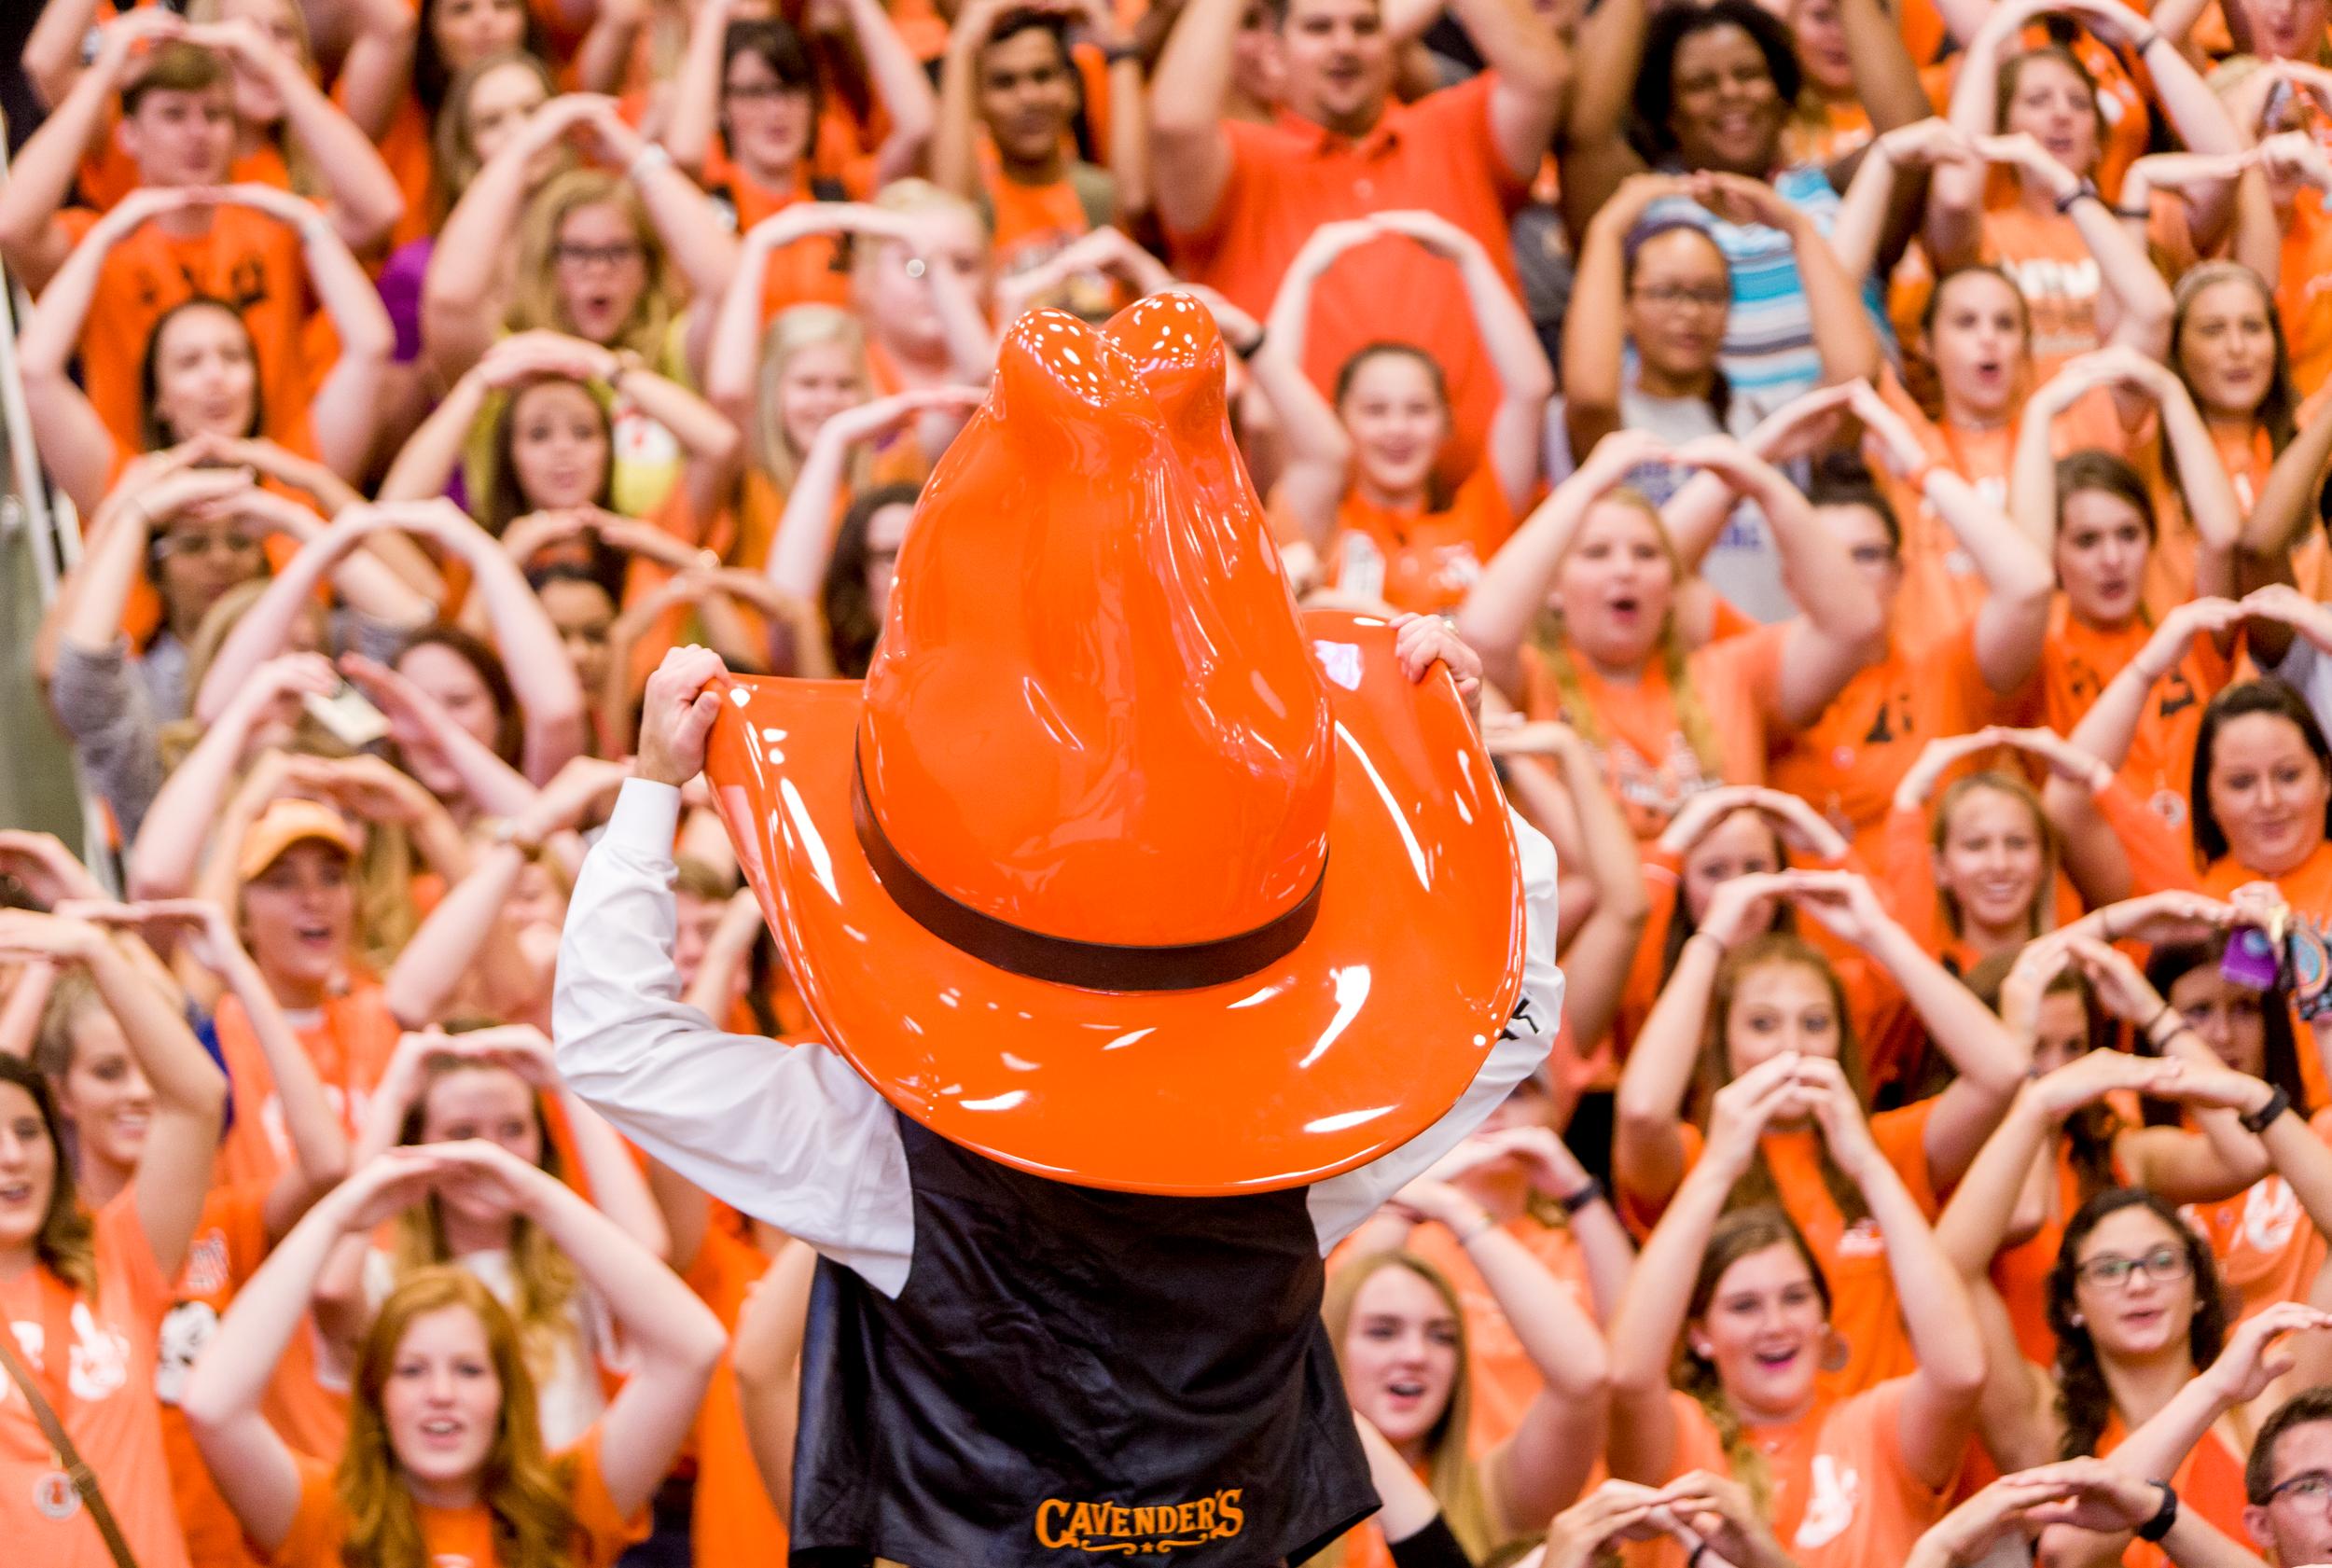 Pistol Pete stands in front of a sea of fans dressed in orange while leading them in the O-S-U chant.